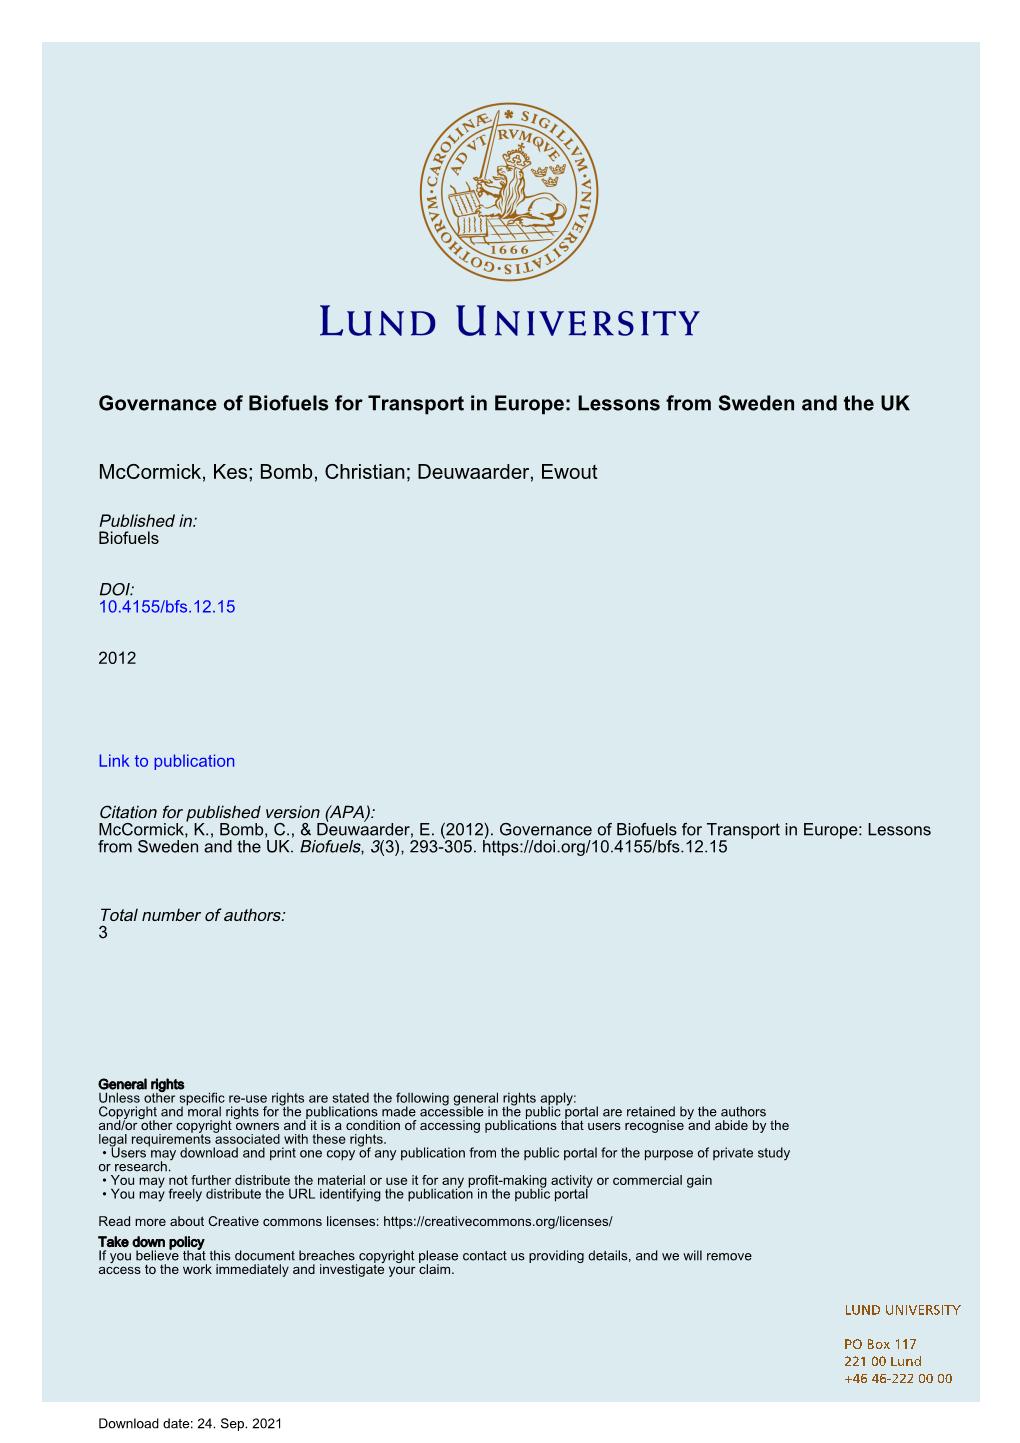 Governance of Biofuels for Transport in Europe: Lessons from Sweden and the UK